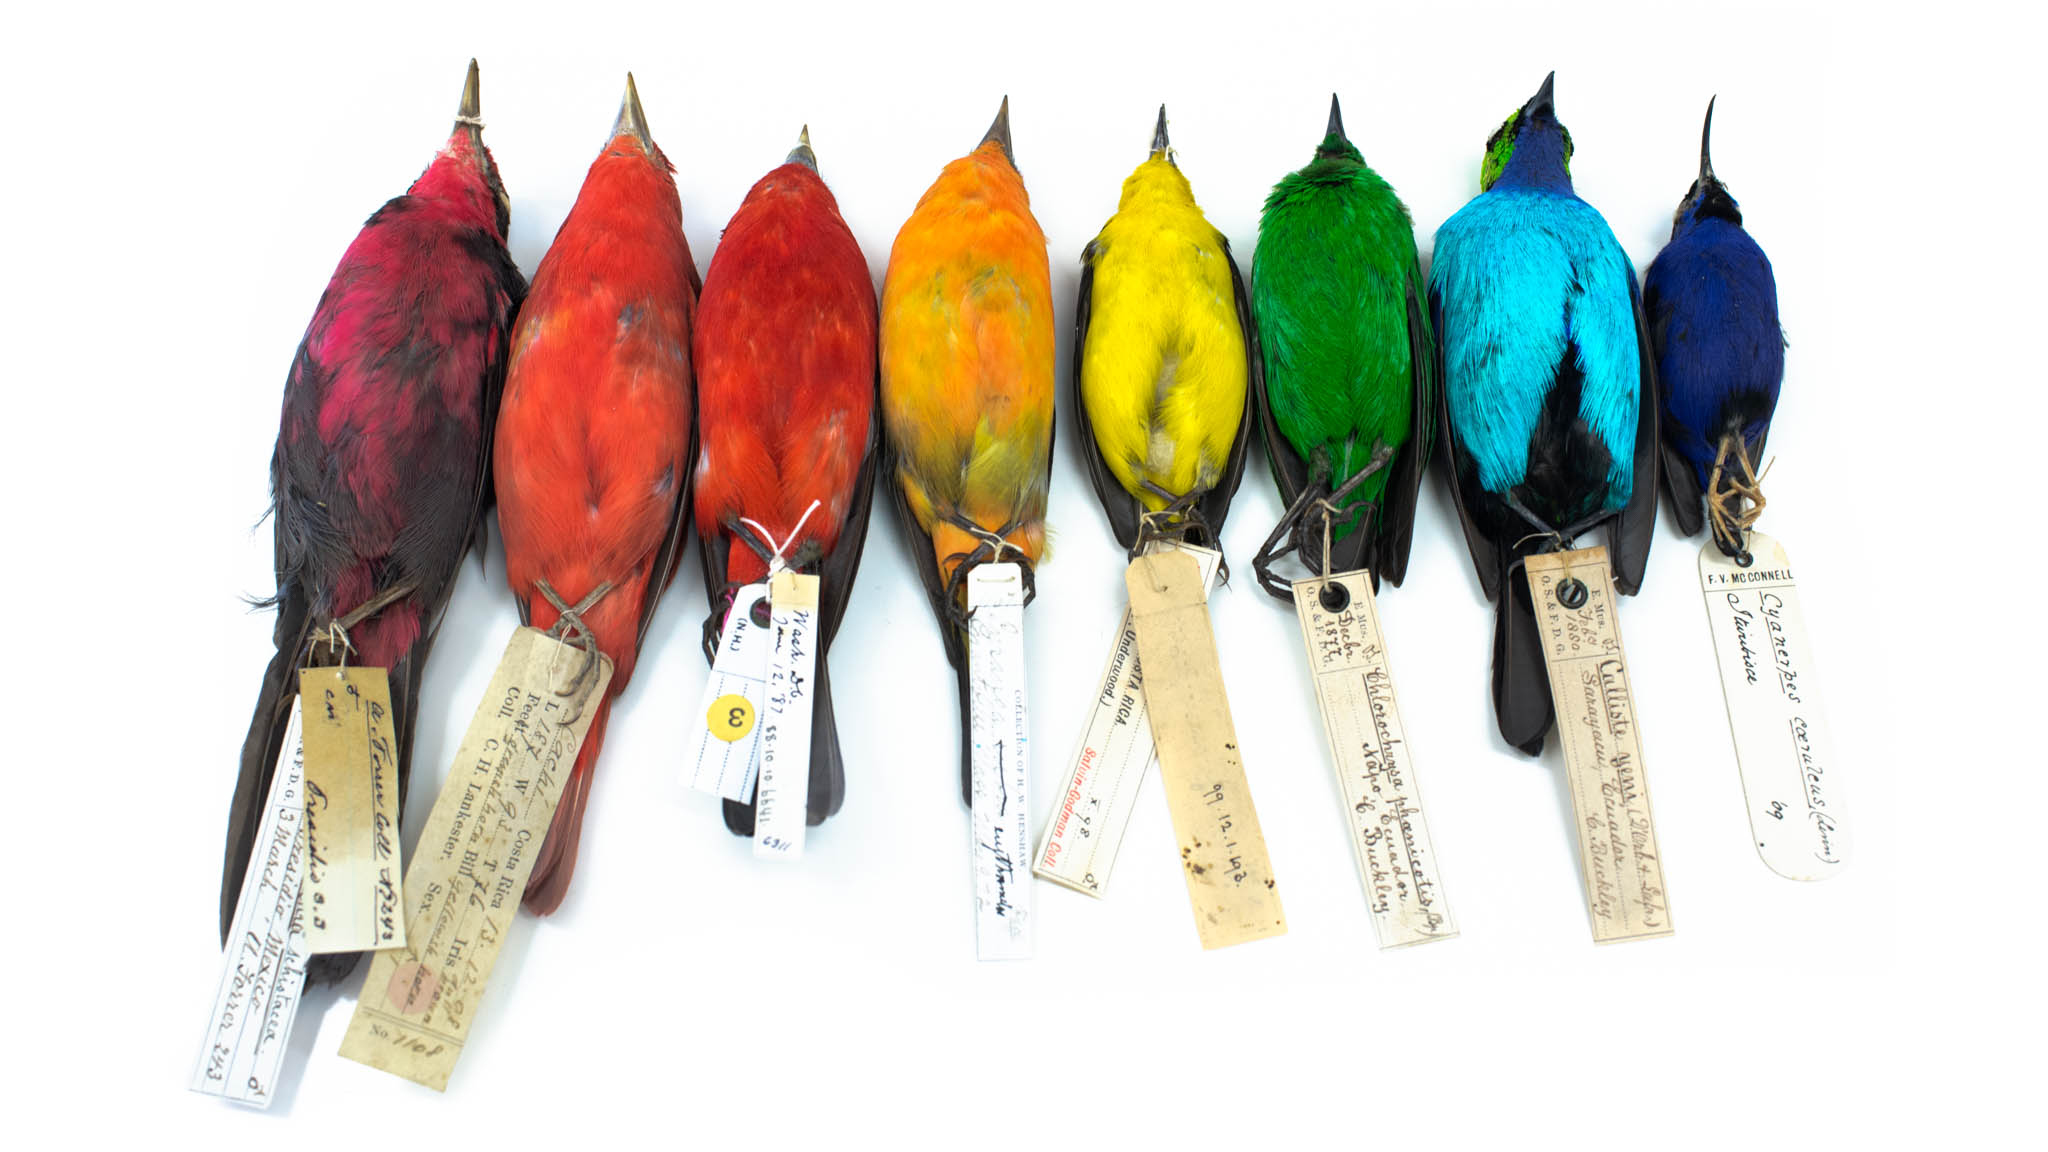 How Did Birds Get So Colorful?